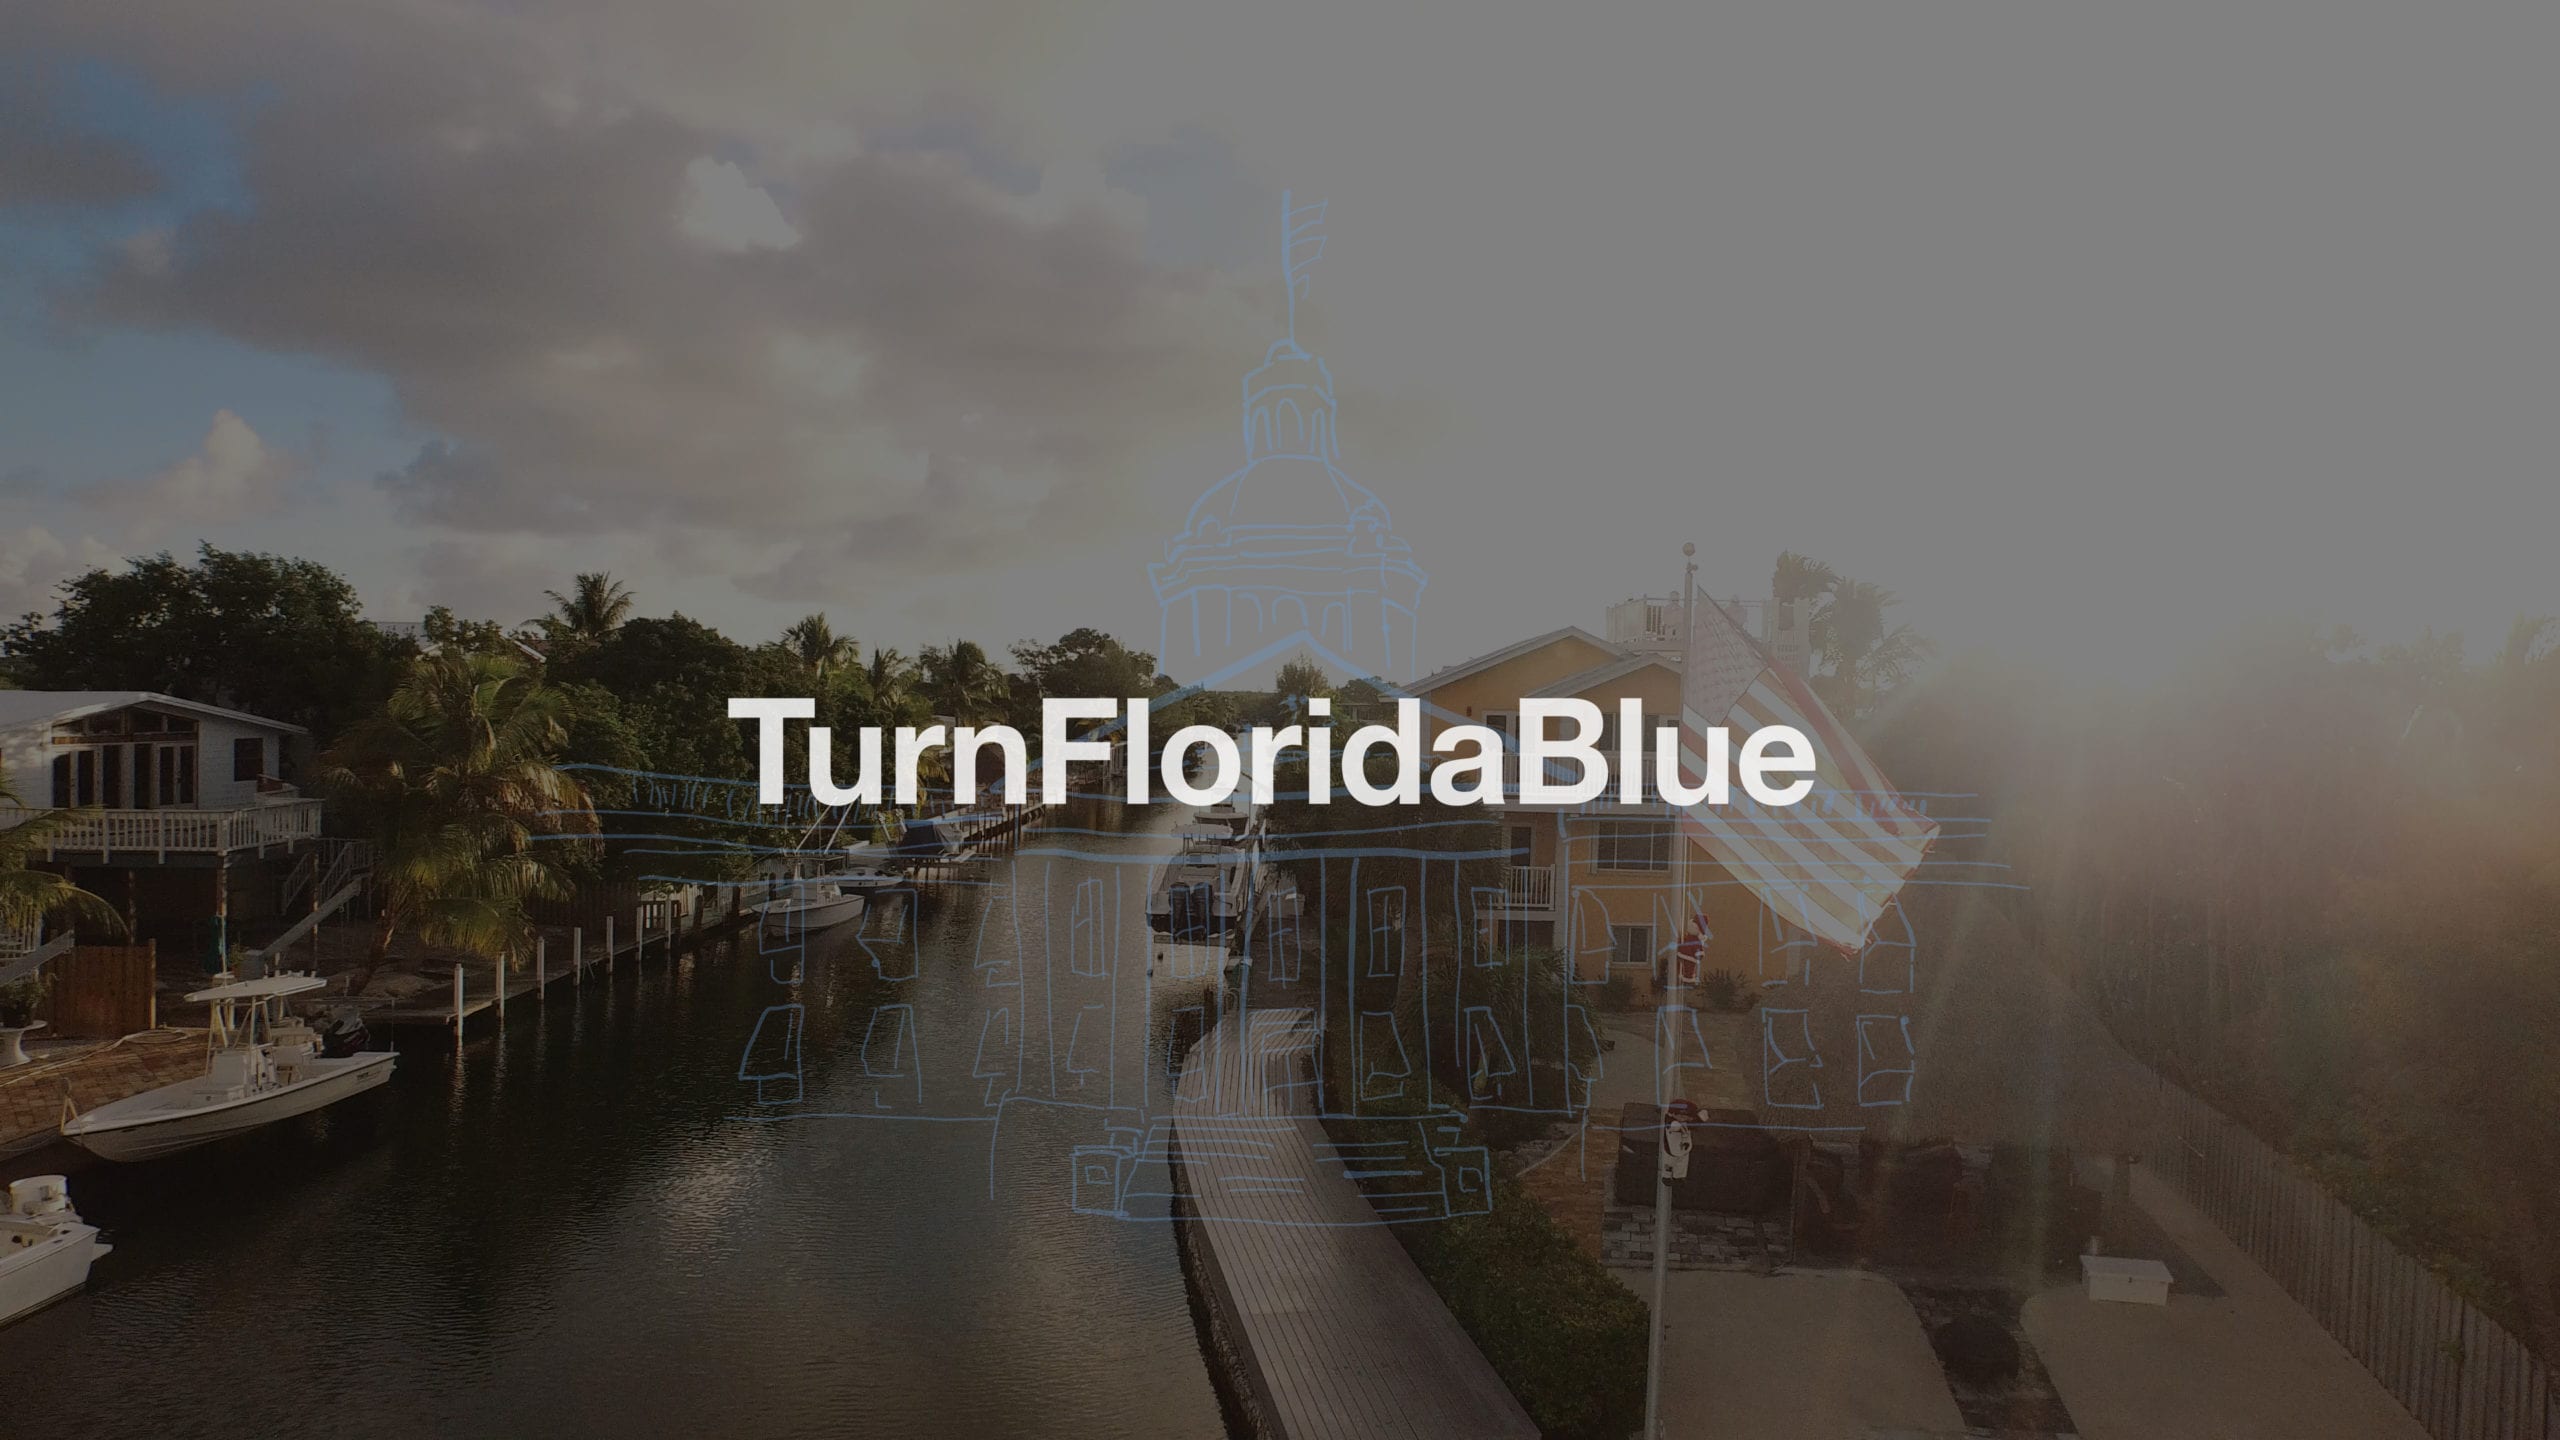 IU C&I Studios Page White Turn Florida Blue title on dimmed backdrop of waterway with houses and boats Florida House Victory Ricky Junquera